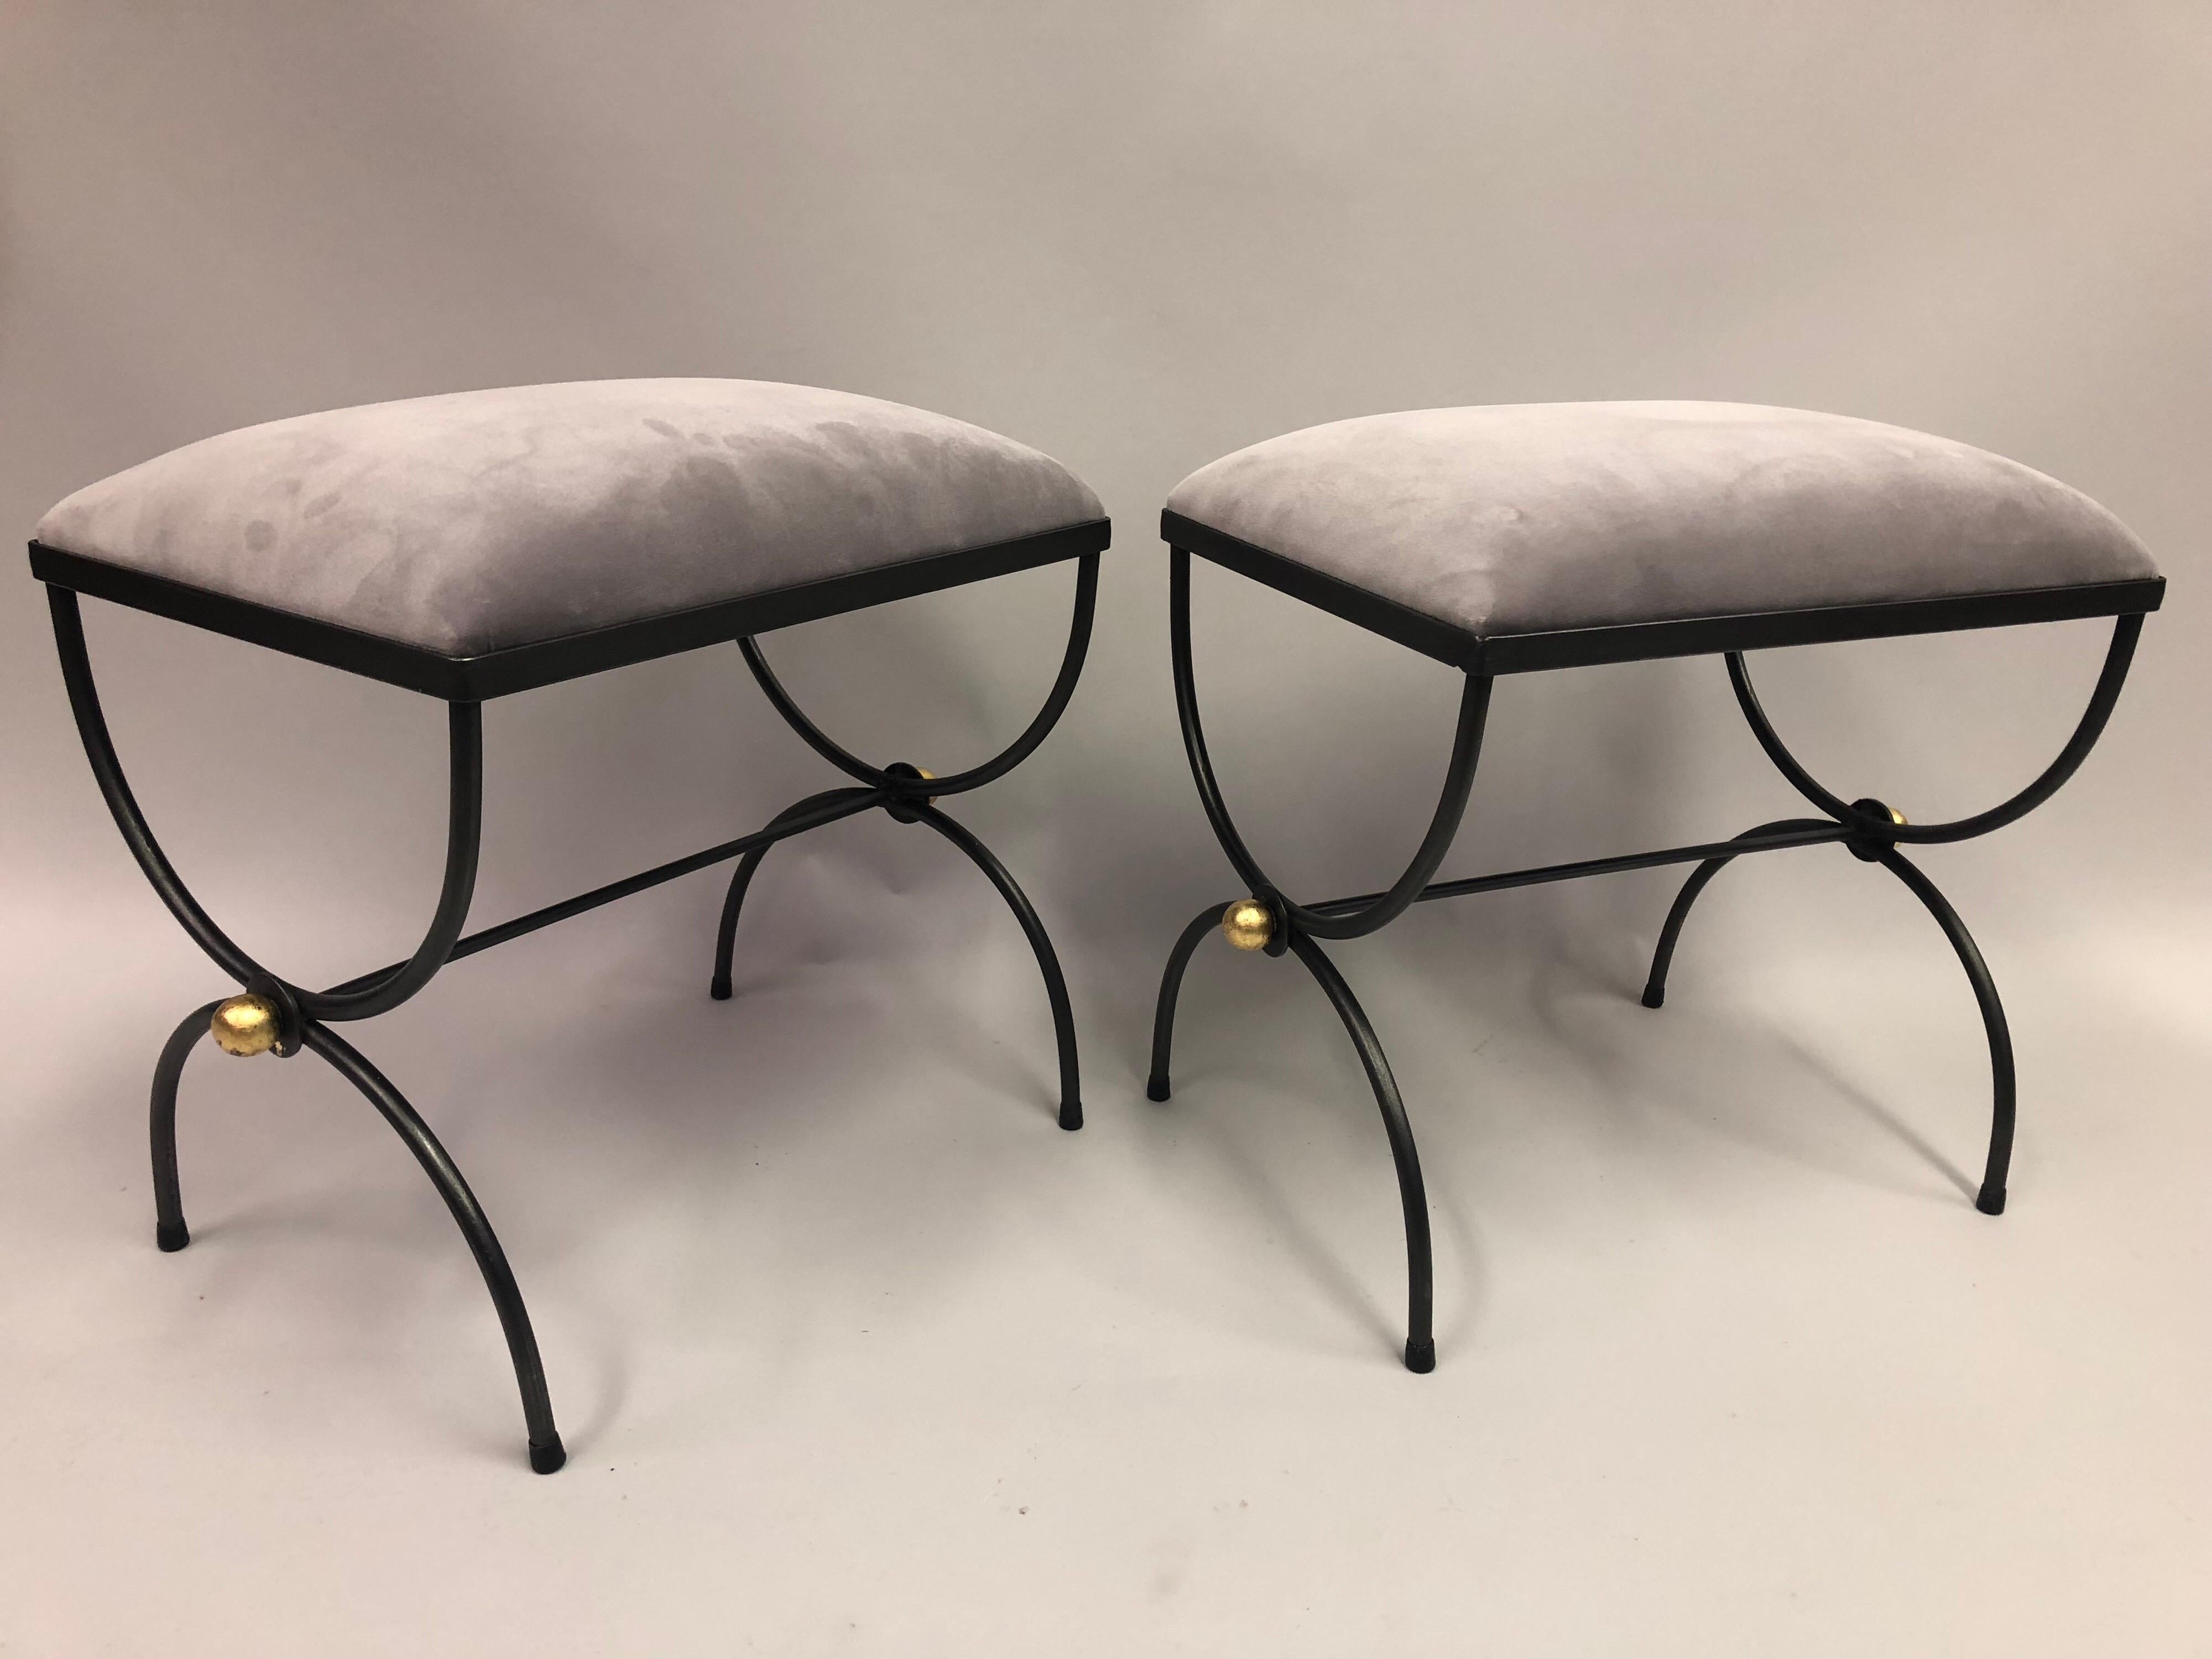 French Pair of Mid-Century Modern Neoclassical Wrought Iron and Gilt Benches or Stools For Sale